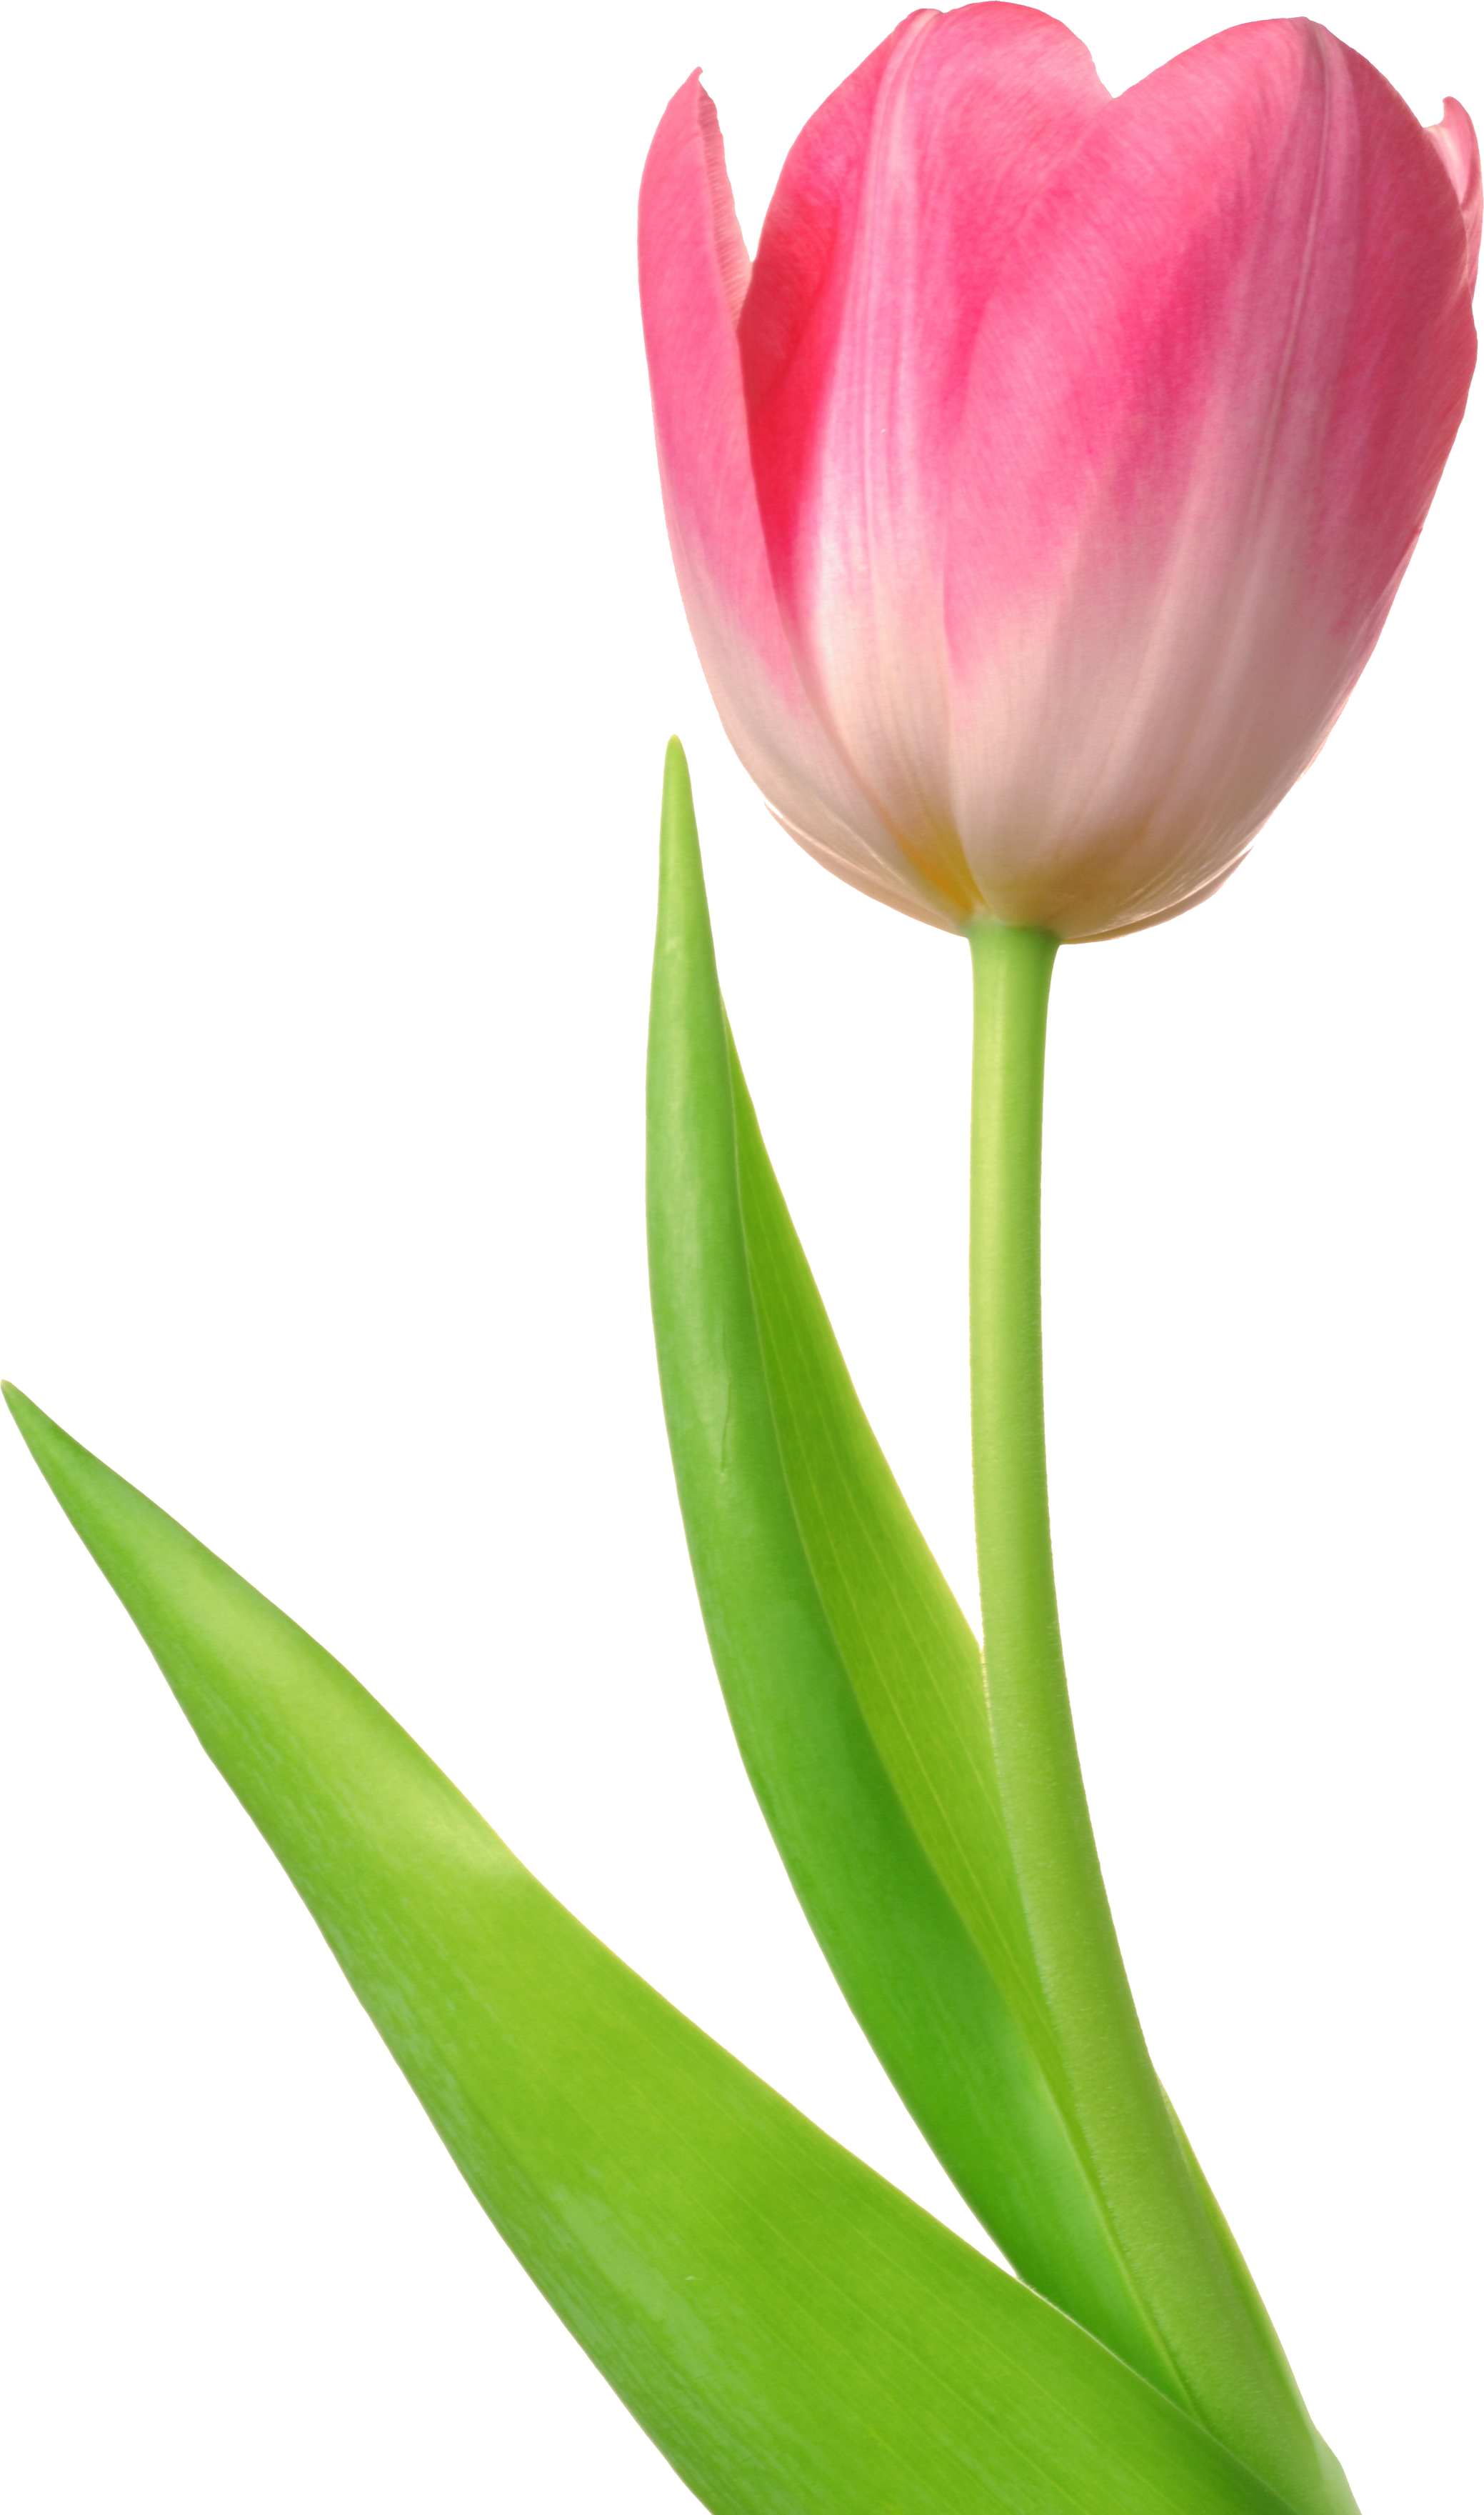 Tulip Png Image - Tulips, Transparent background PNG HD thumbnail